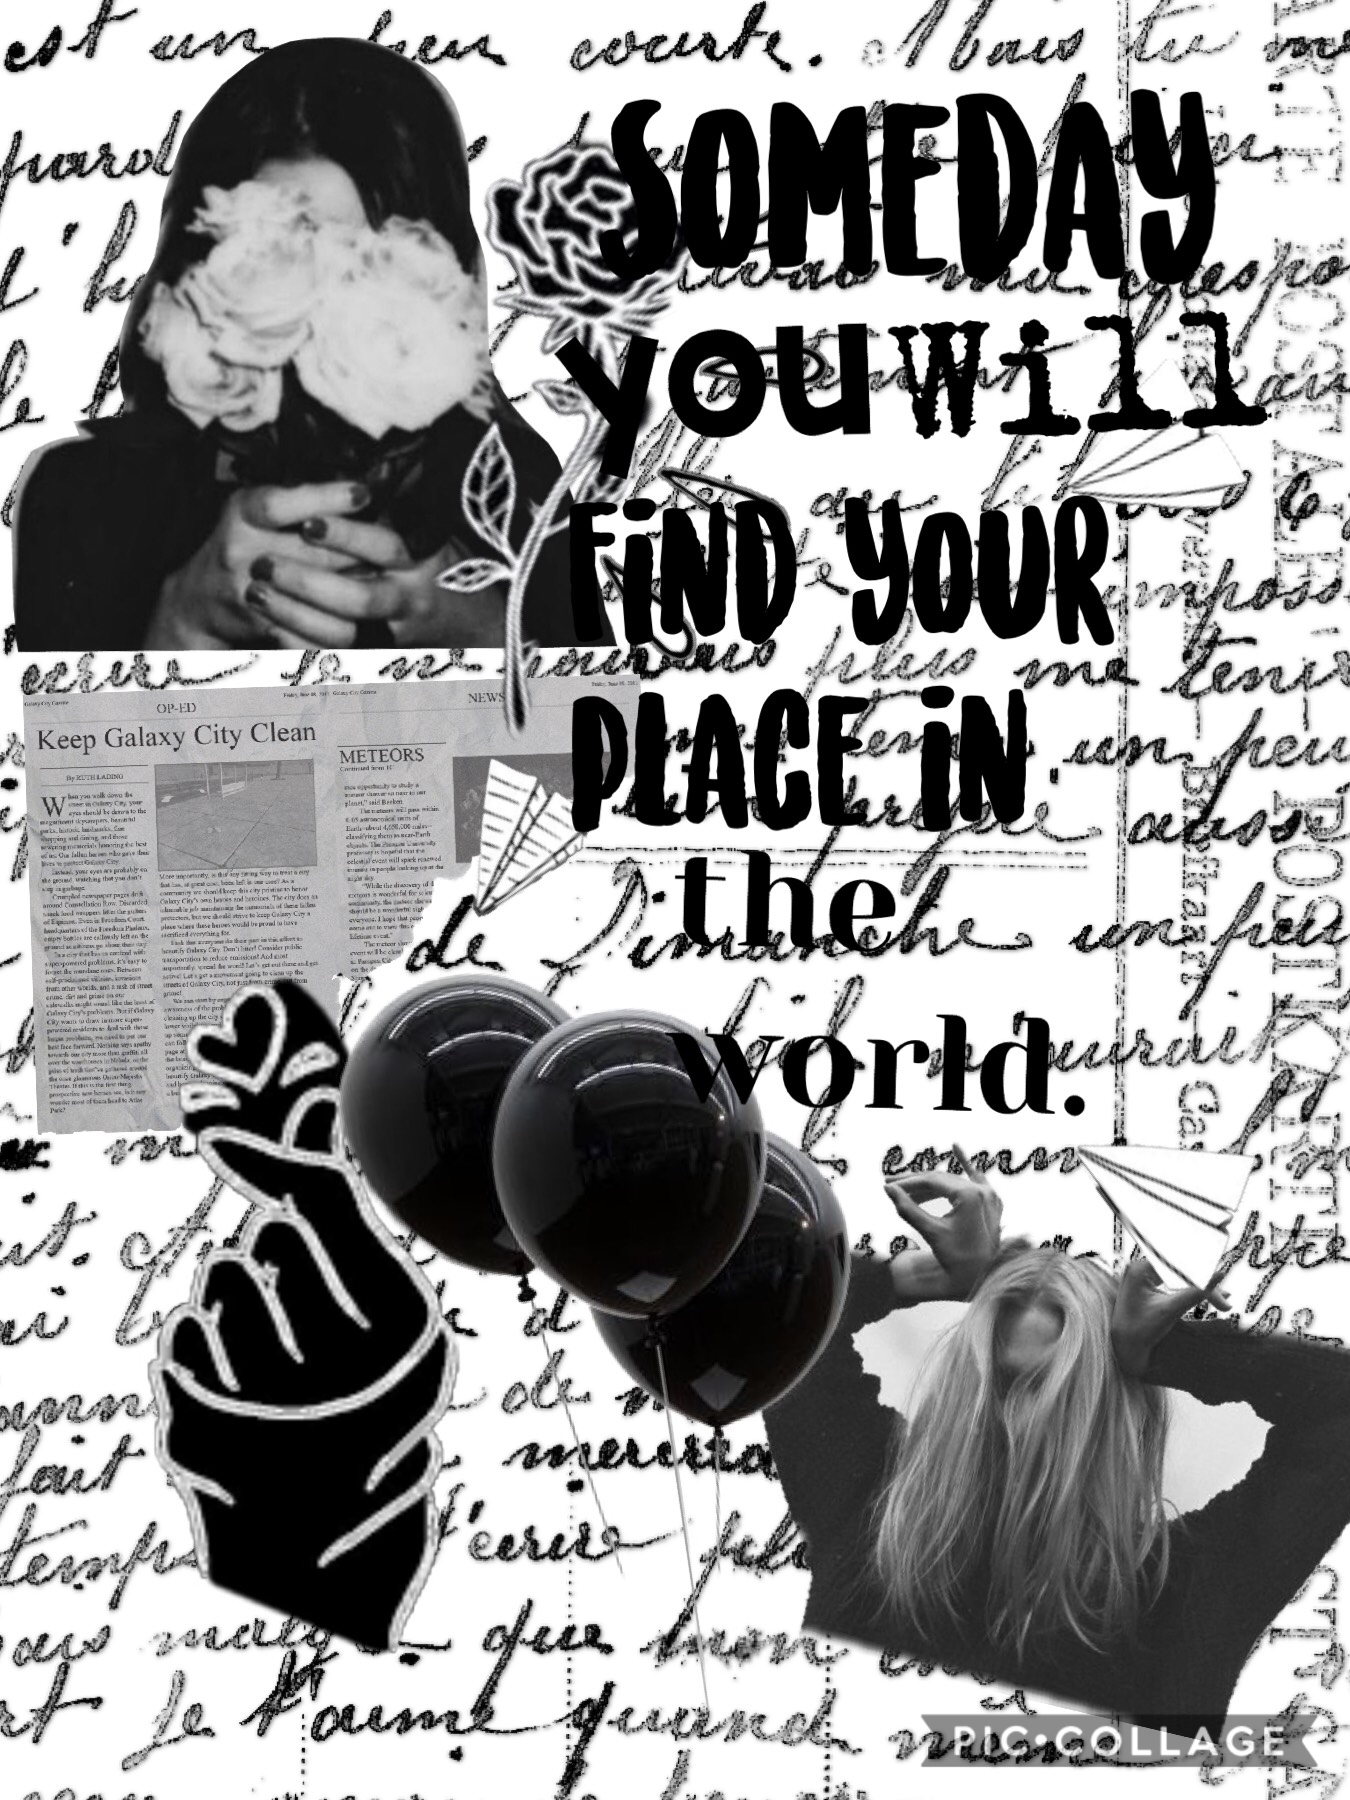 I’m so sorry I haven’t posted in the longesttttt time! This is another collage that I attempted to make, hope you like it! 
-Apoorva 